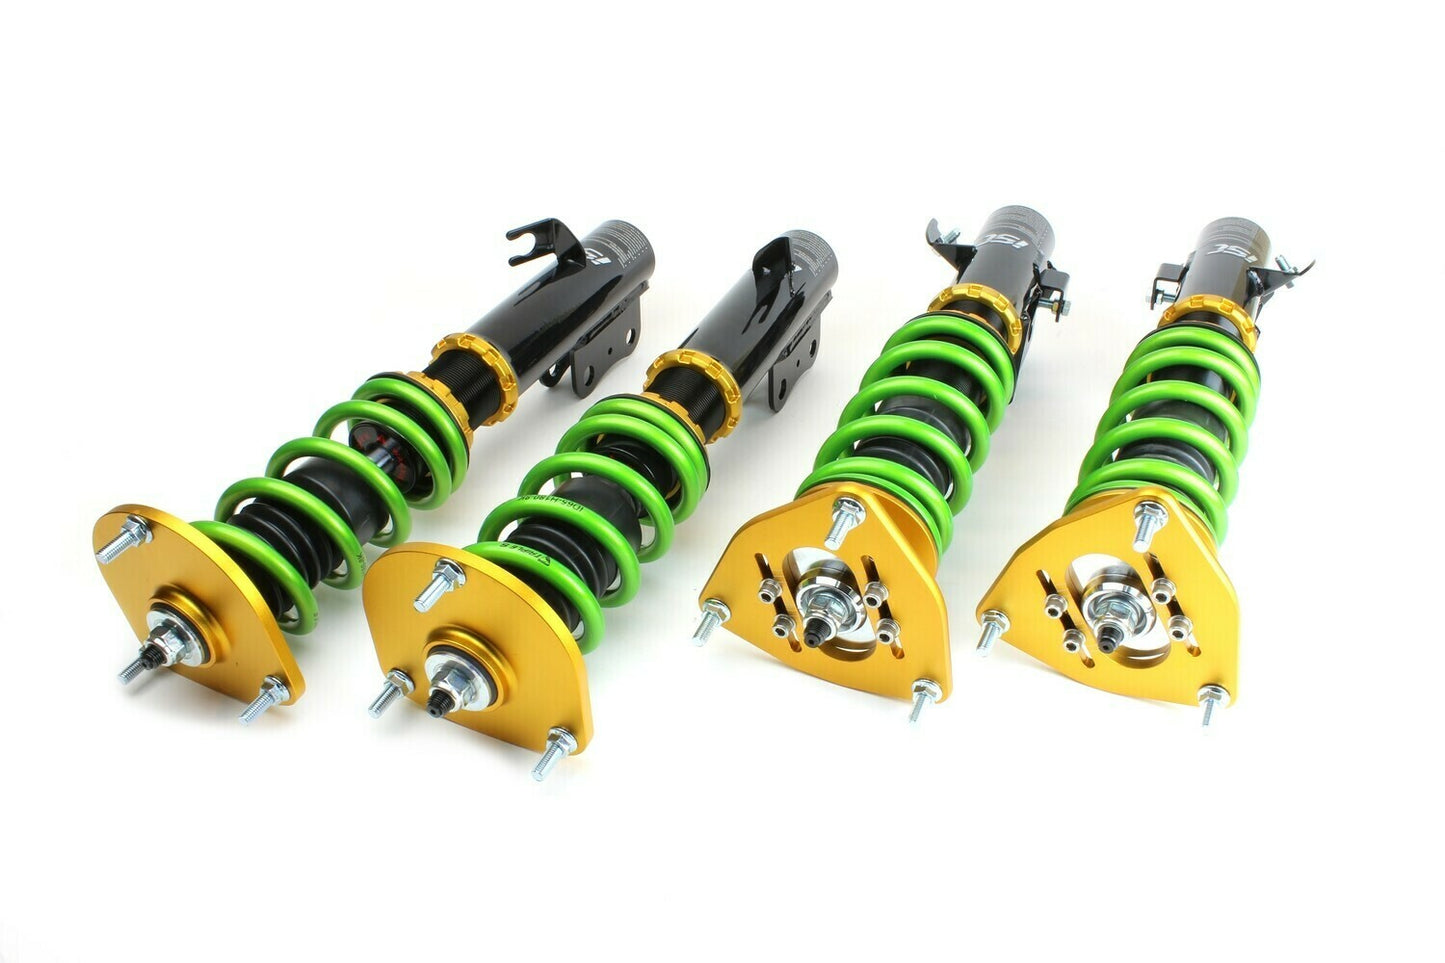 ACURA RSX DC5 CHASSIS 02-06 ISC V2 BASIC COILOVER SUSPENSION WITH COILOVER COVERS